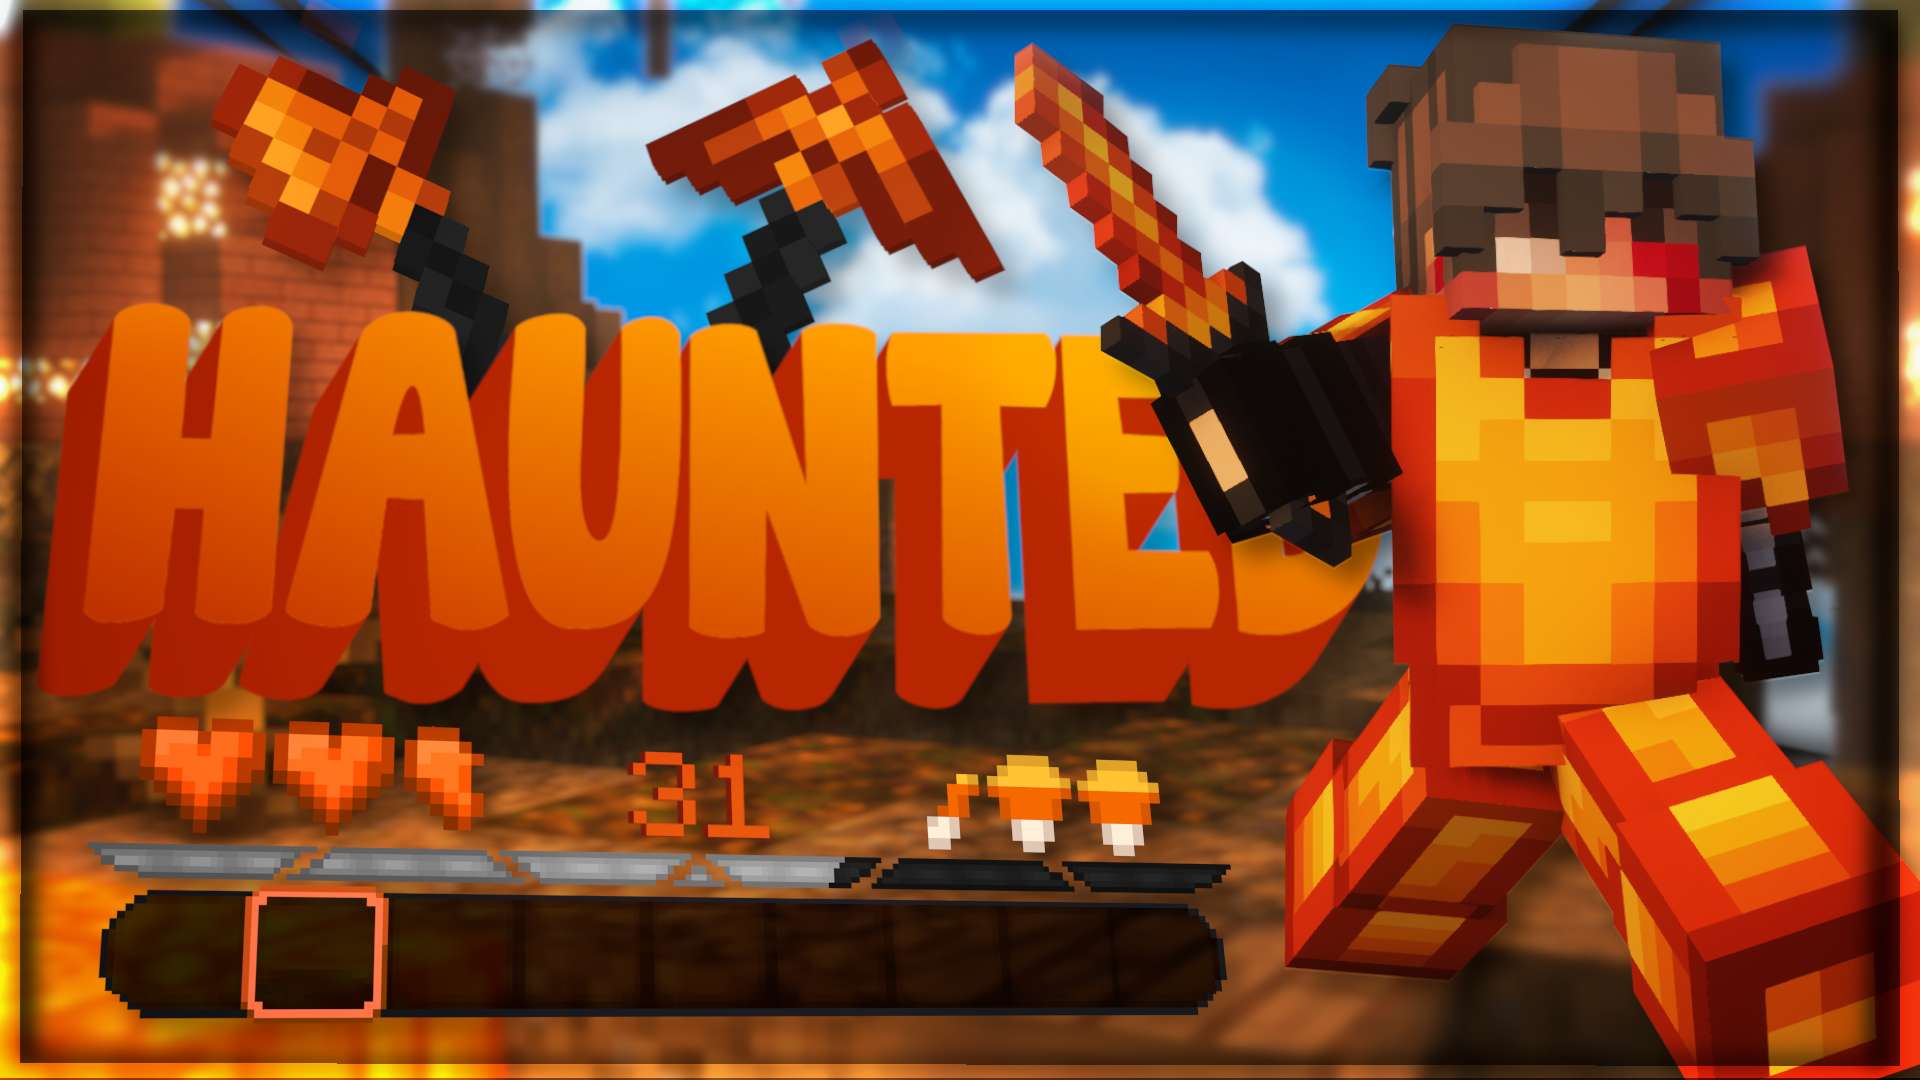 Haunted  16x by NotTaylaur on PvPRP